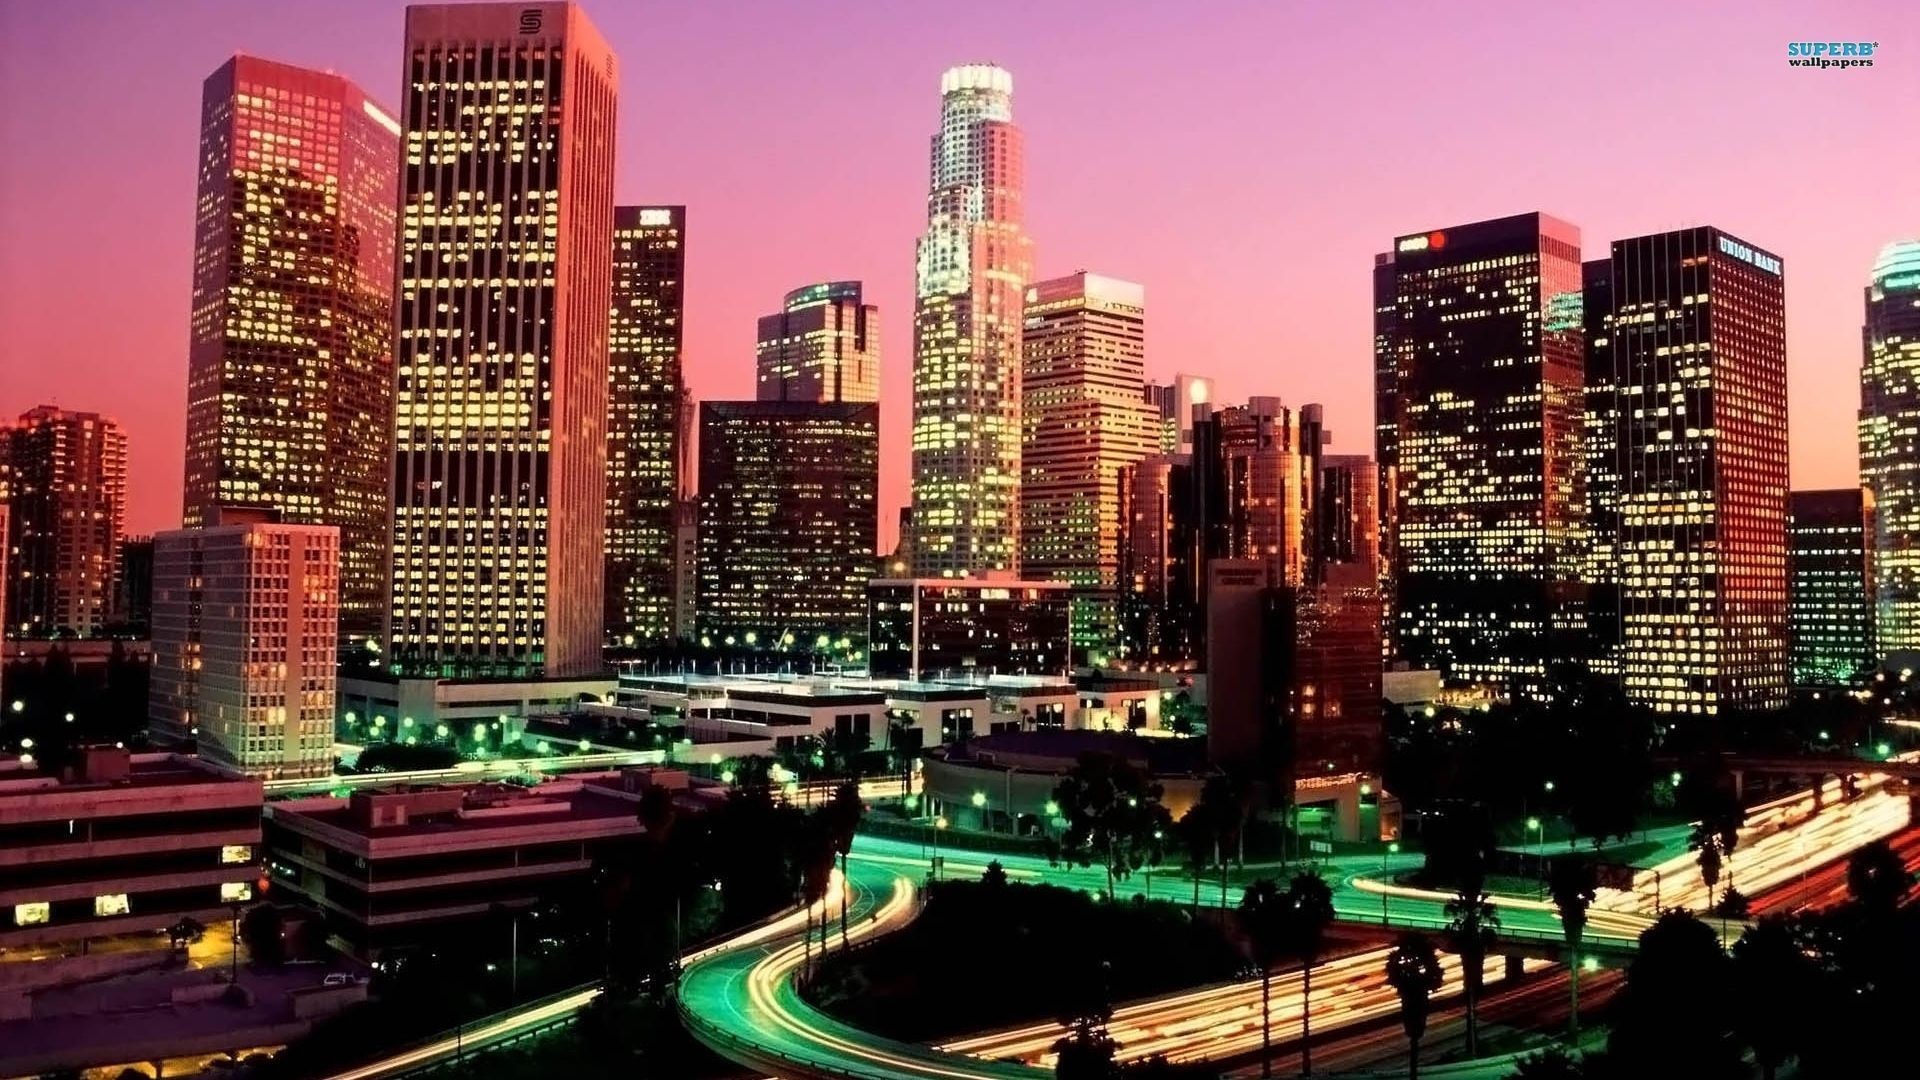 1920x1080 Los Angeles wallpaper - World wallpapers - #4161